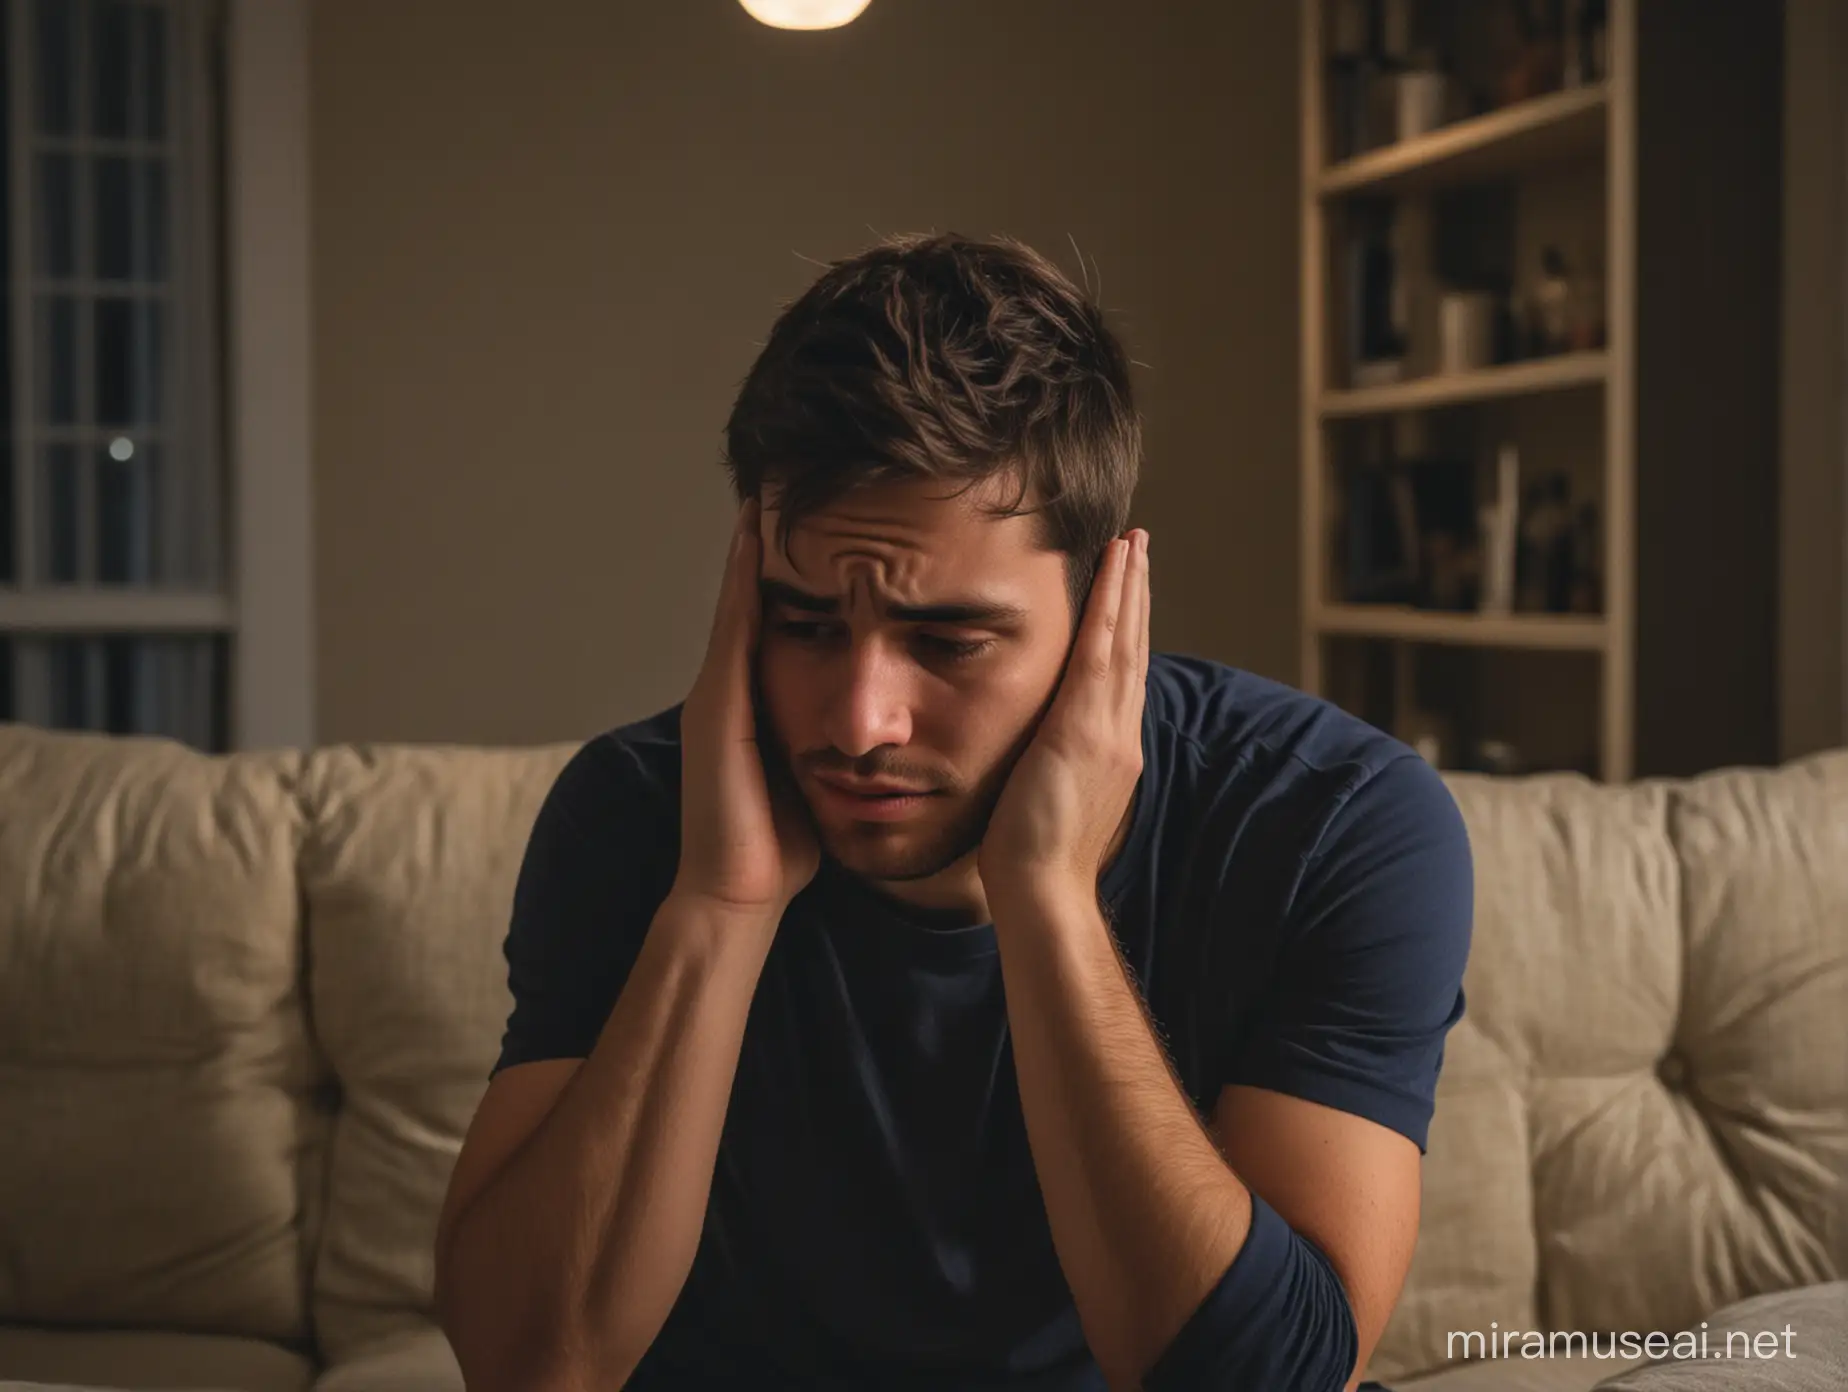 Concerned Young Man Sitting Alone in Dimly Lit Living Room at Night